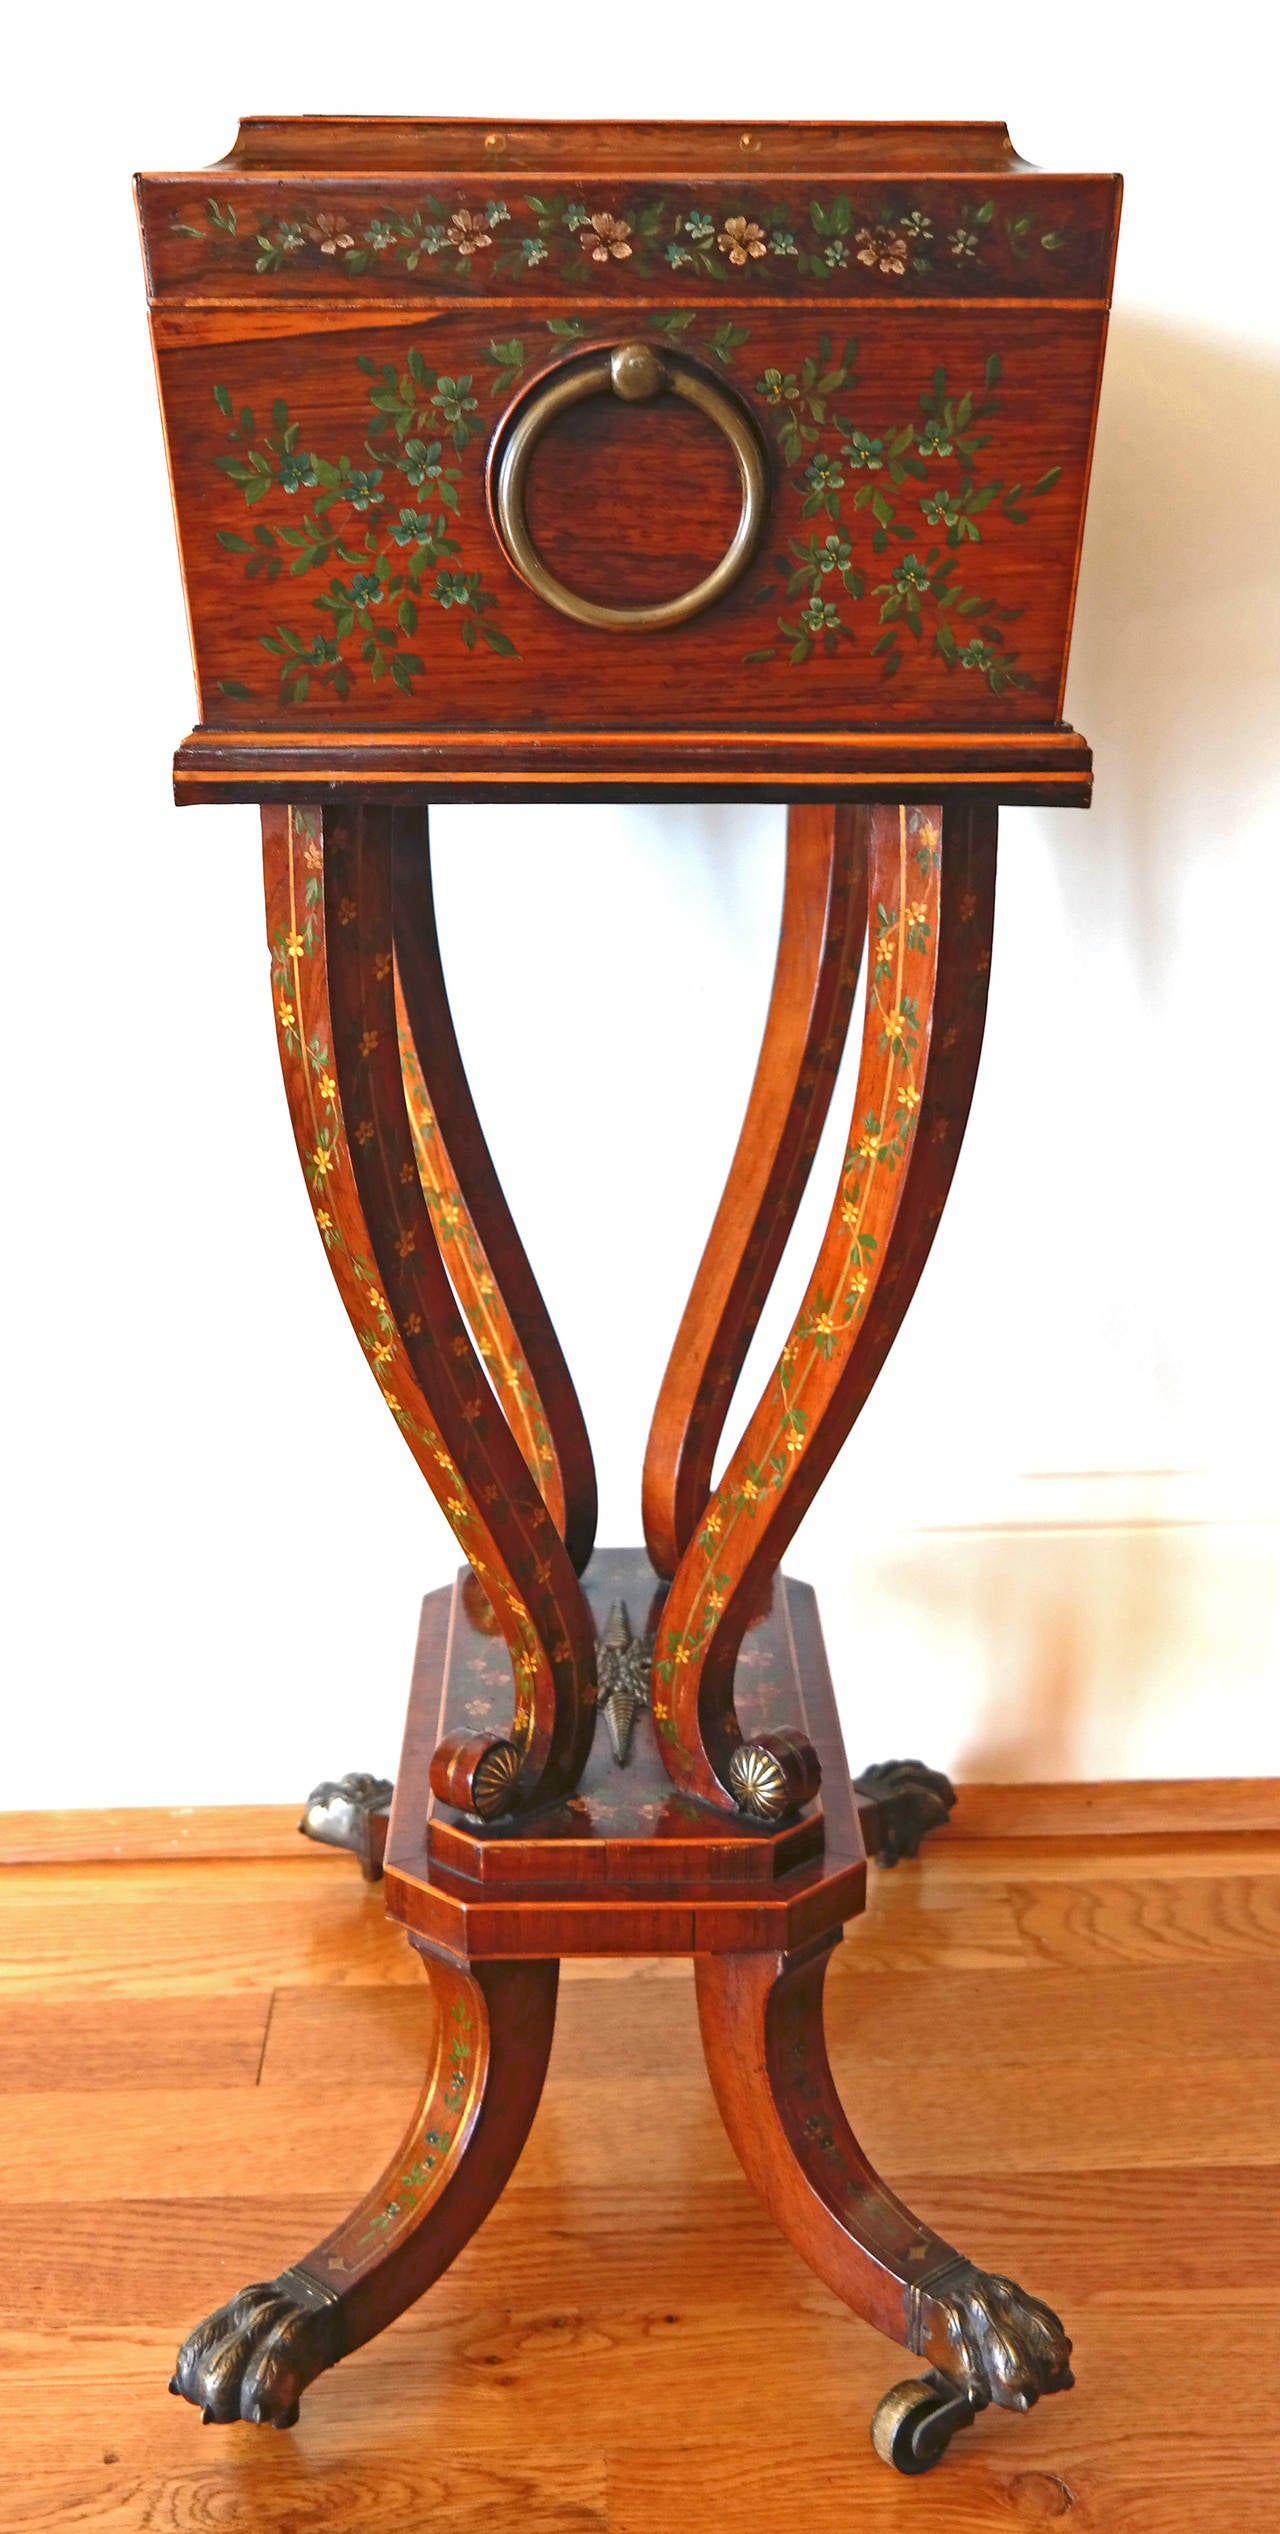 Early 19th century Regency hand-painted rosewood workbox with brass inlay, Circa 1790.